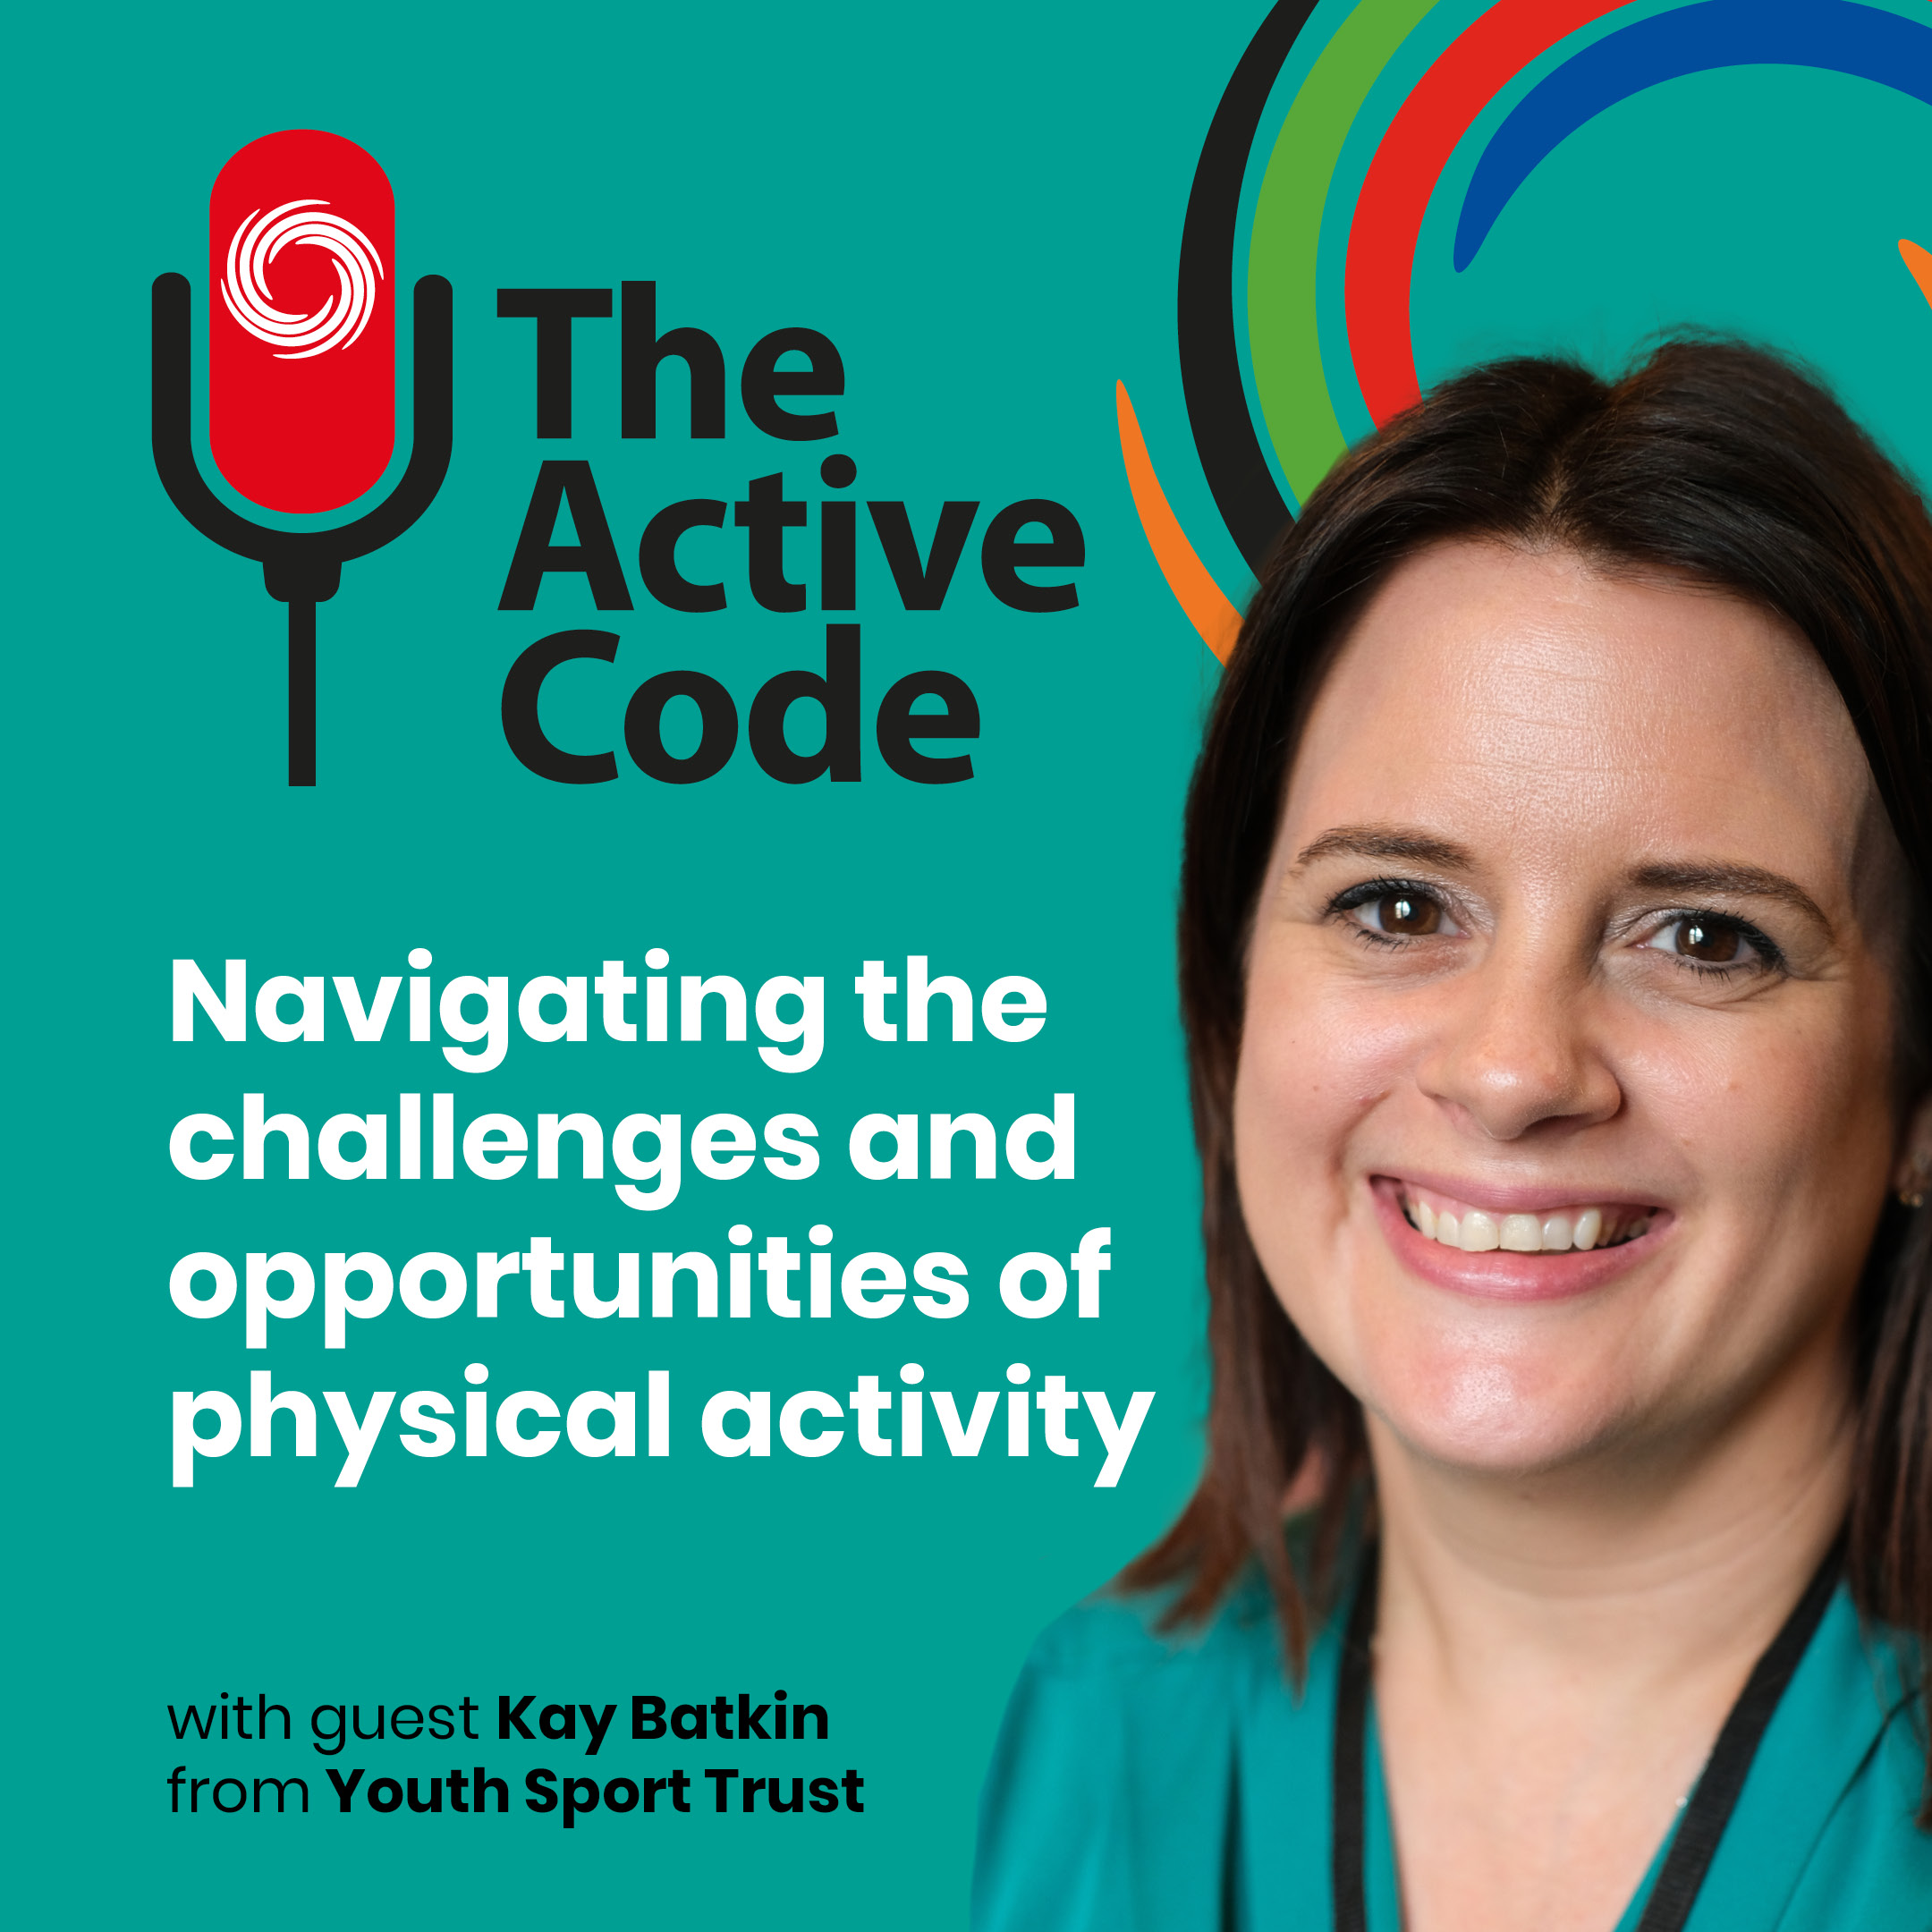 The Active Code – Navigating the challenges and opportunities of physical activity